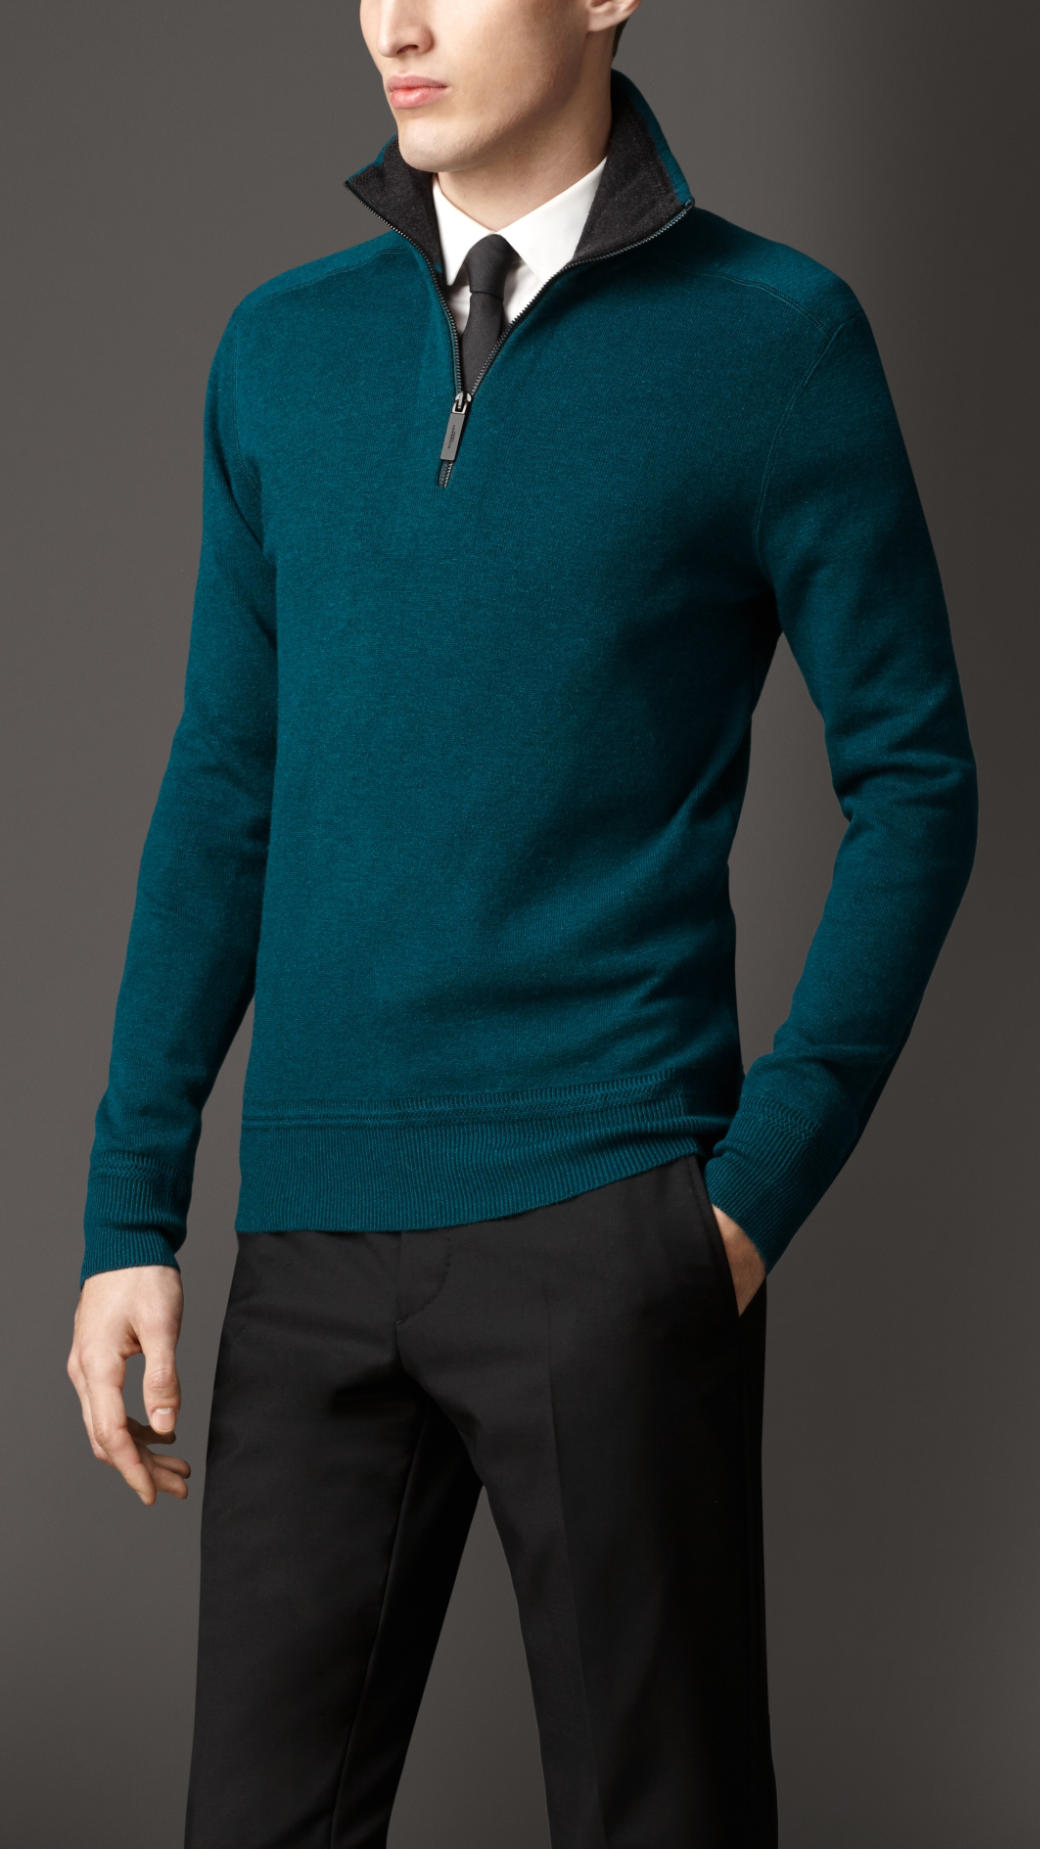 Lyst - Burberry Doublefaced Cashmere Sweater in Green for Men